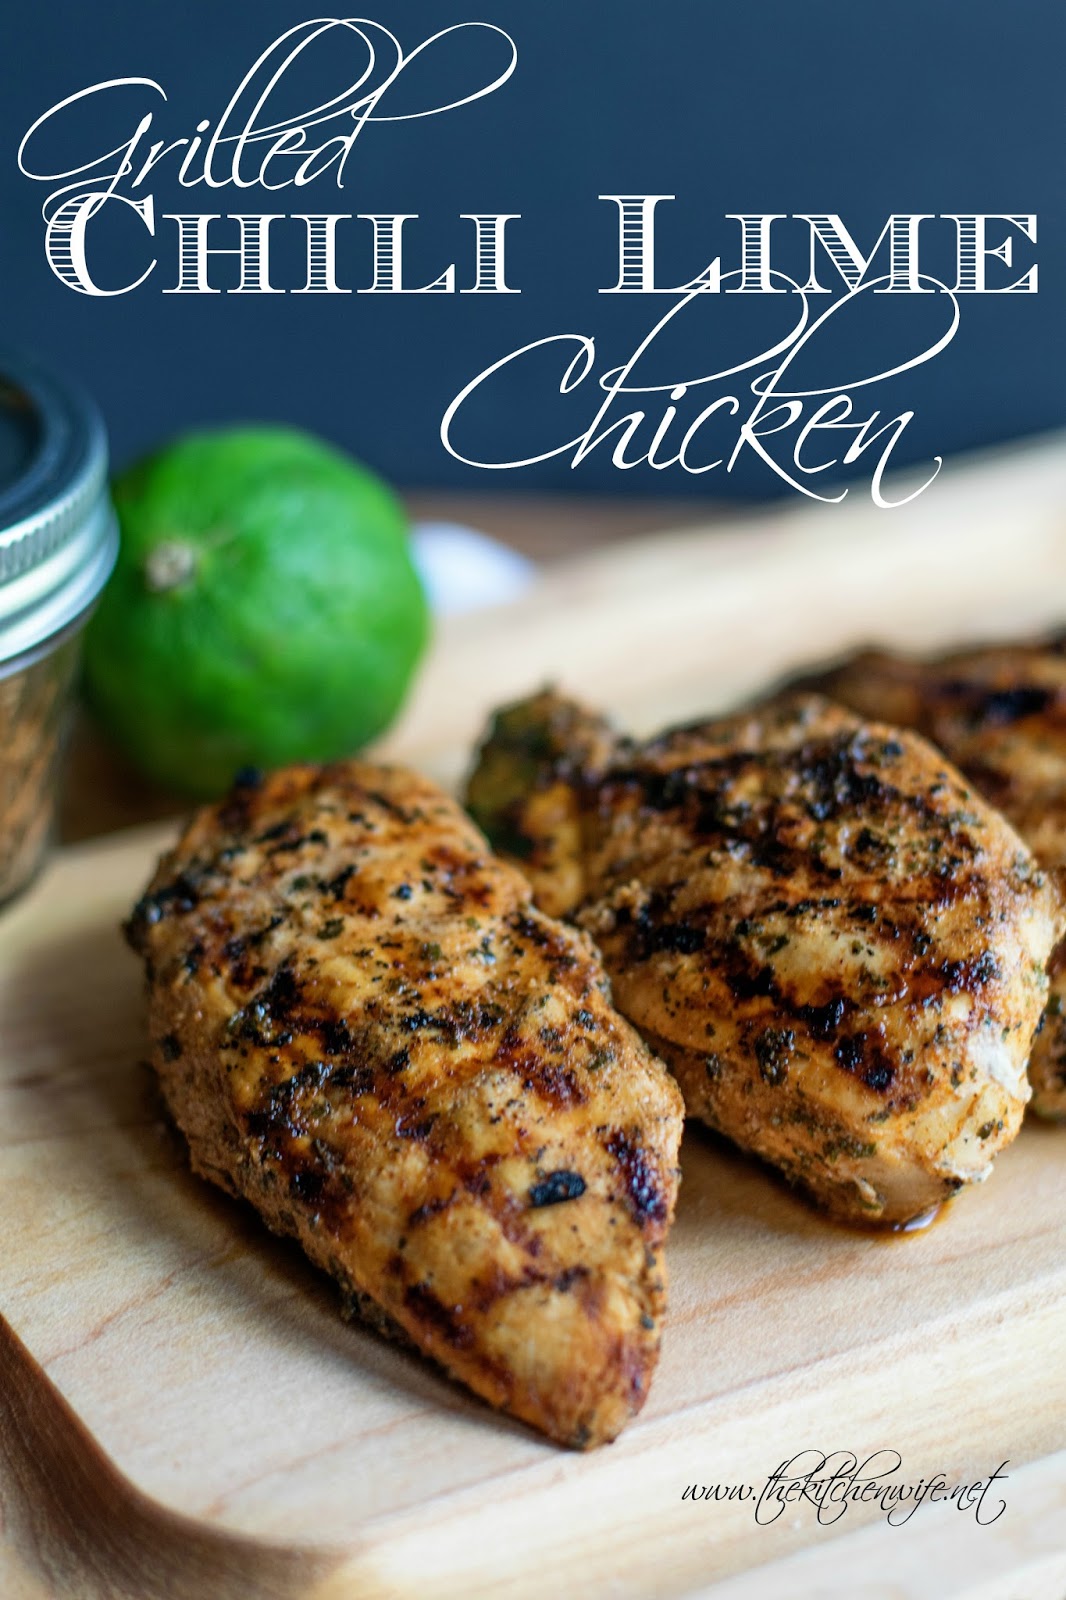 Grilled Chili Lime Chicken Recipe - ~The Kitchen Wife~